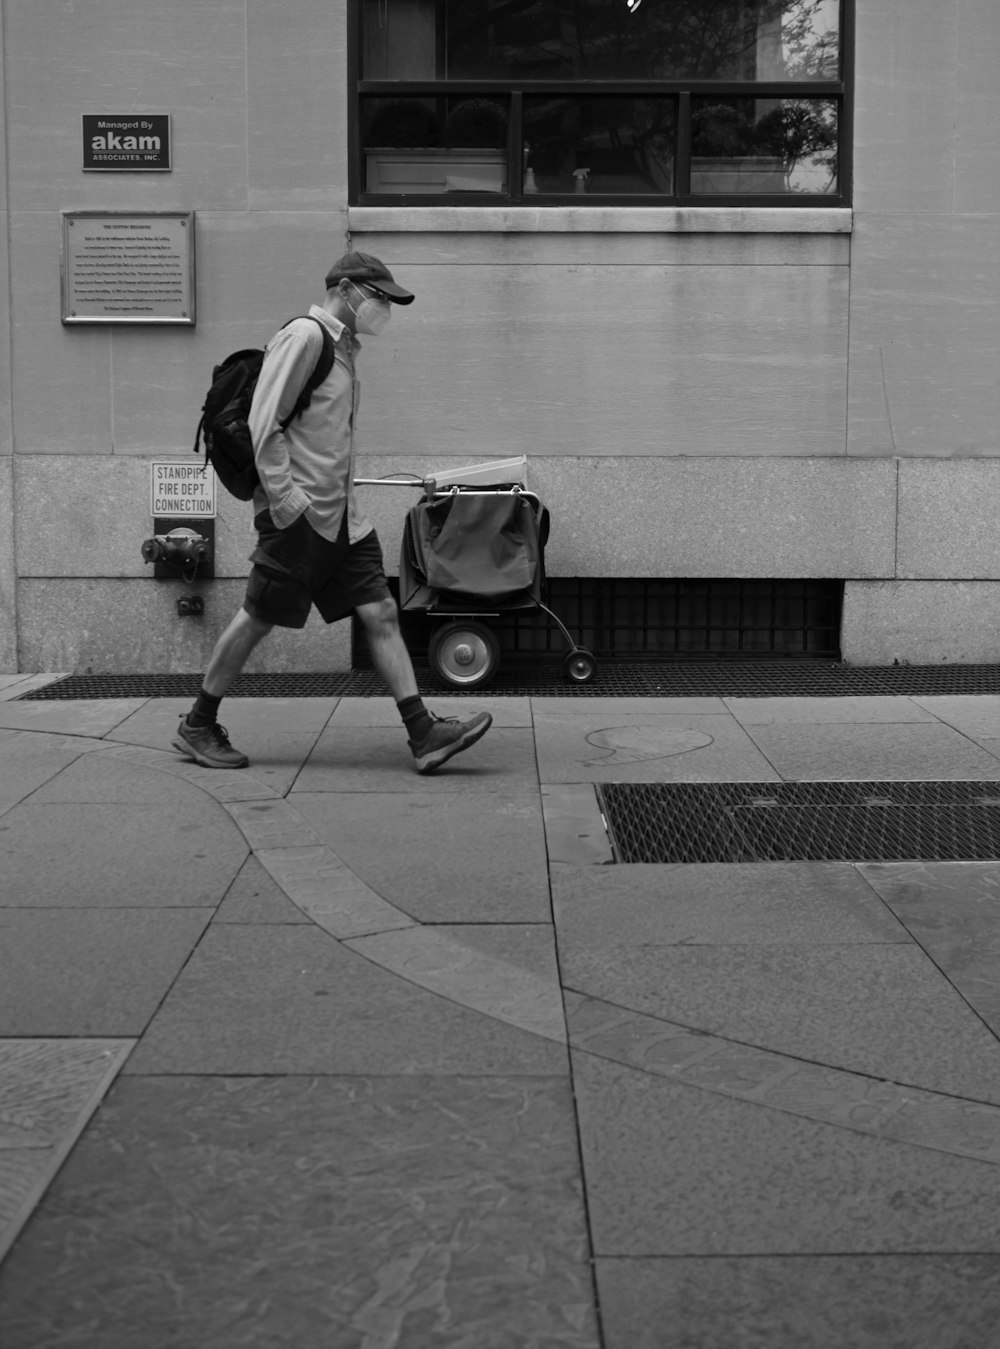 a person pulling a suitcase